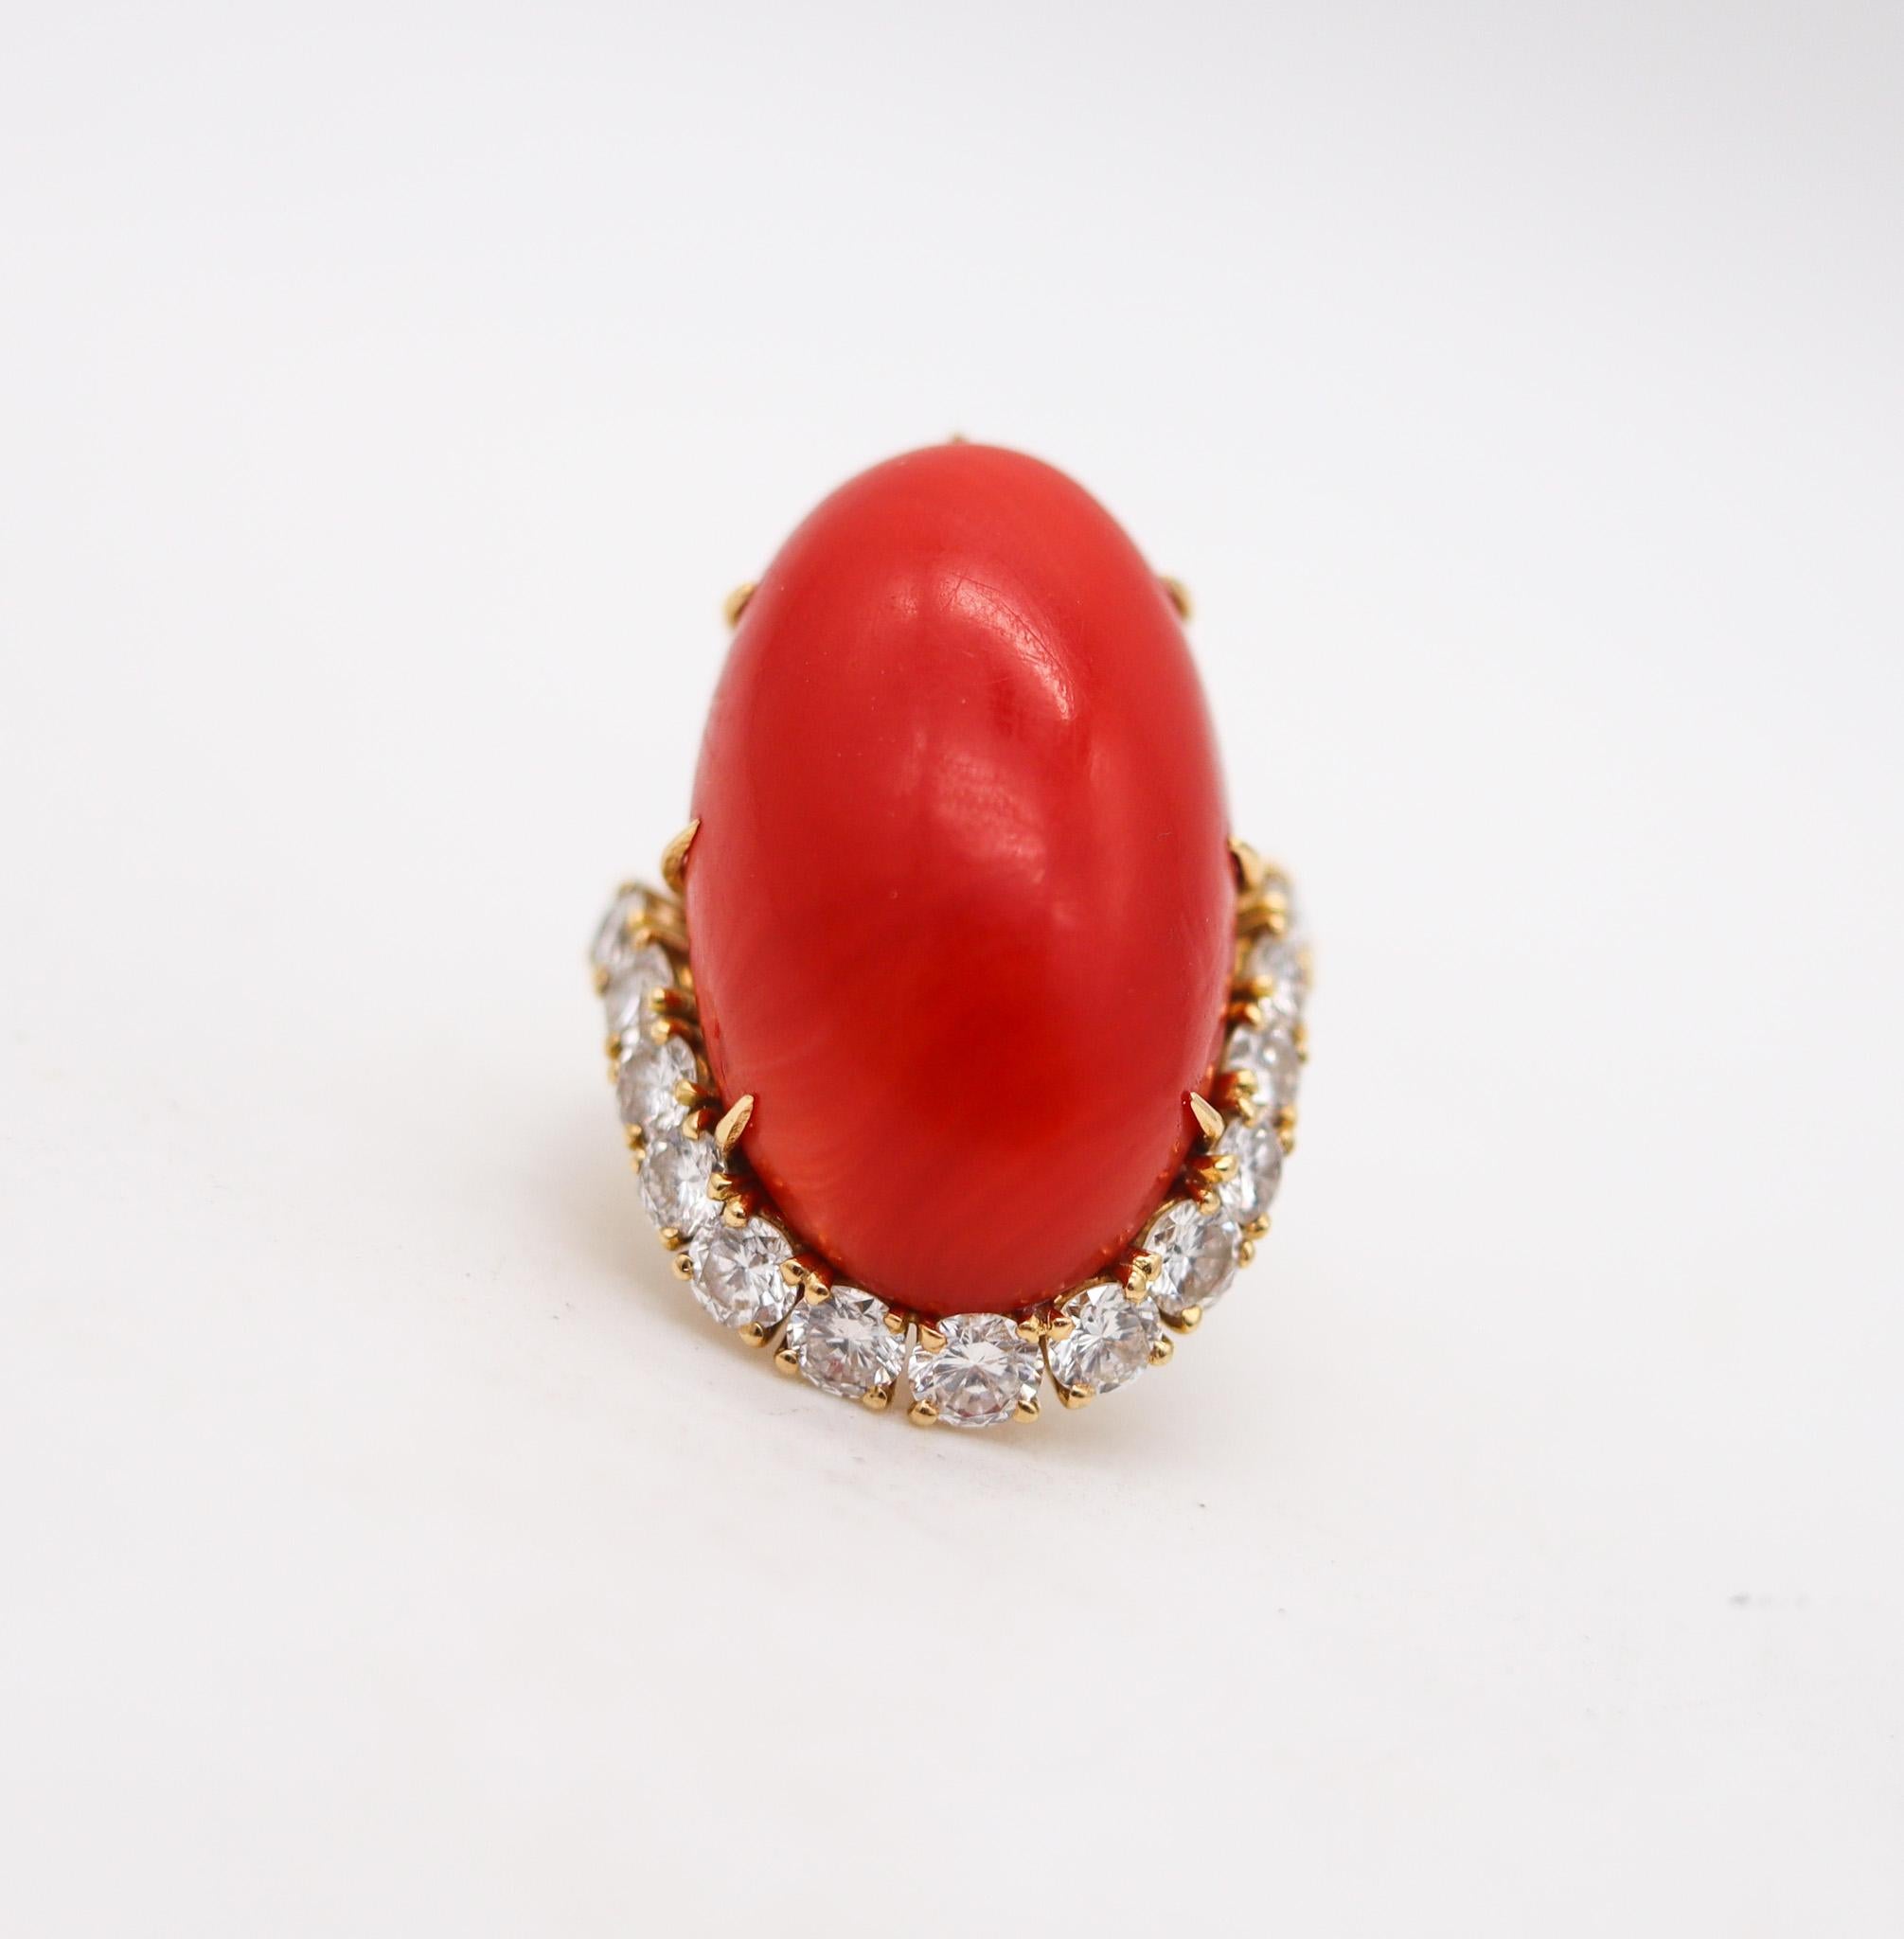 Women's Boucheron Paris 1950 Modernist Ring In 18Kt Gold With 27.52 Ctw Diamonds & Coral For Sale